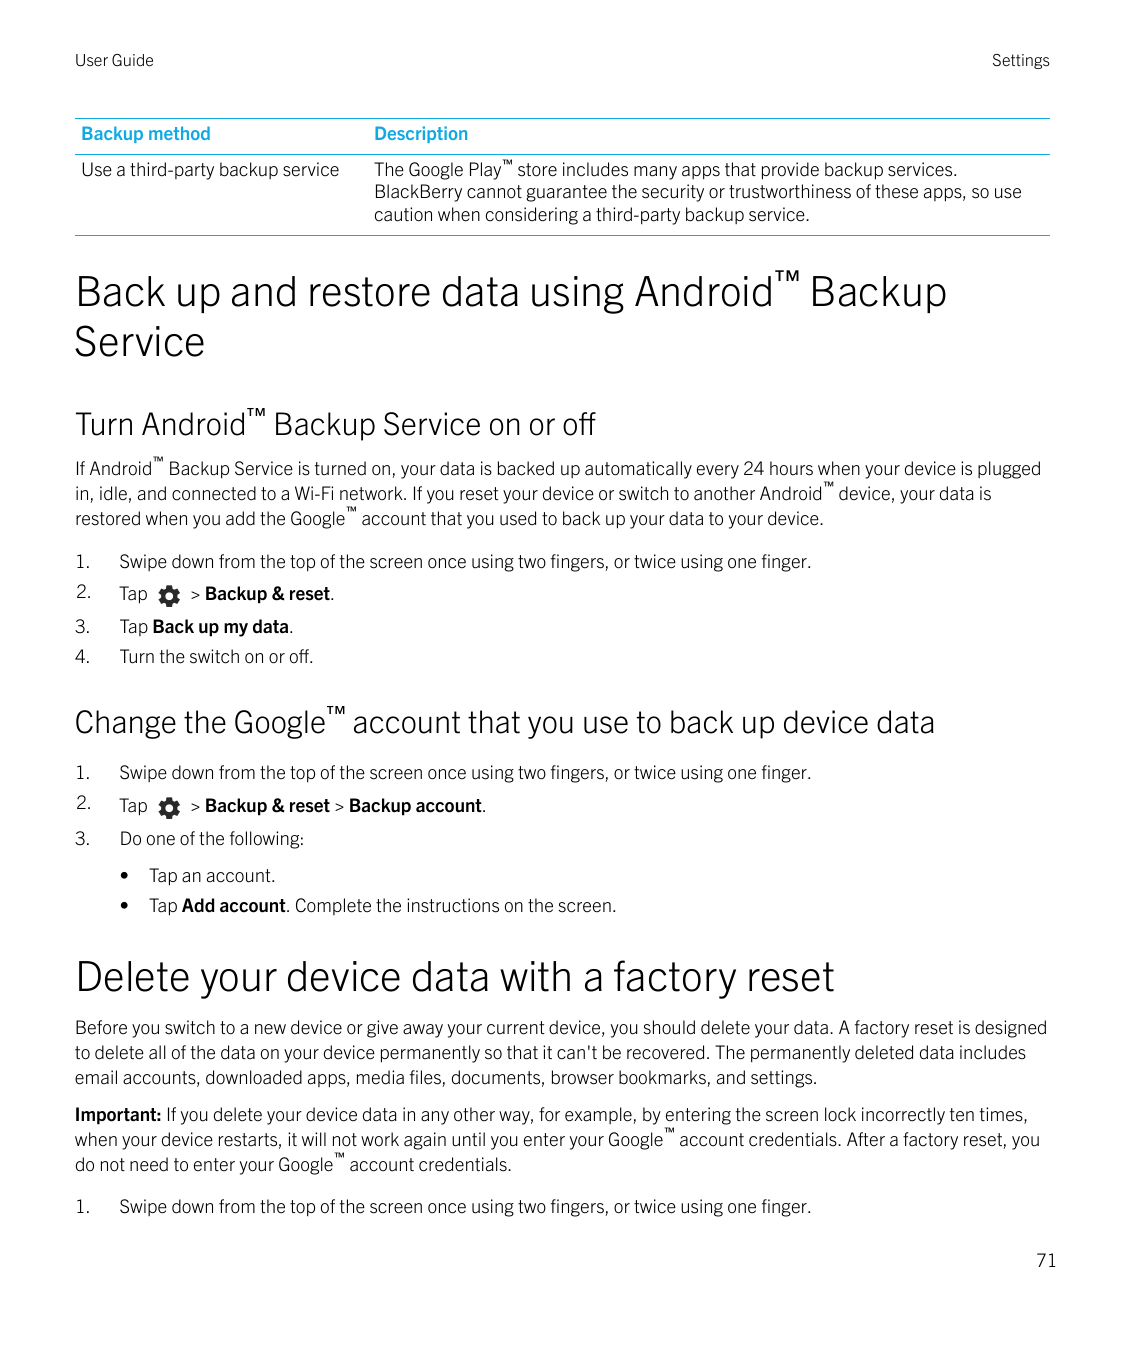 User GuideSettingsBackup methodDescriptionUse a third-party backup serviceThe Google Play™ store includes many apps that provide